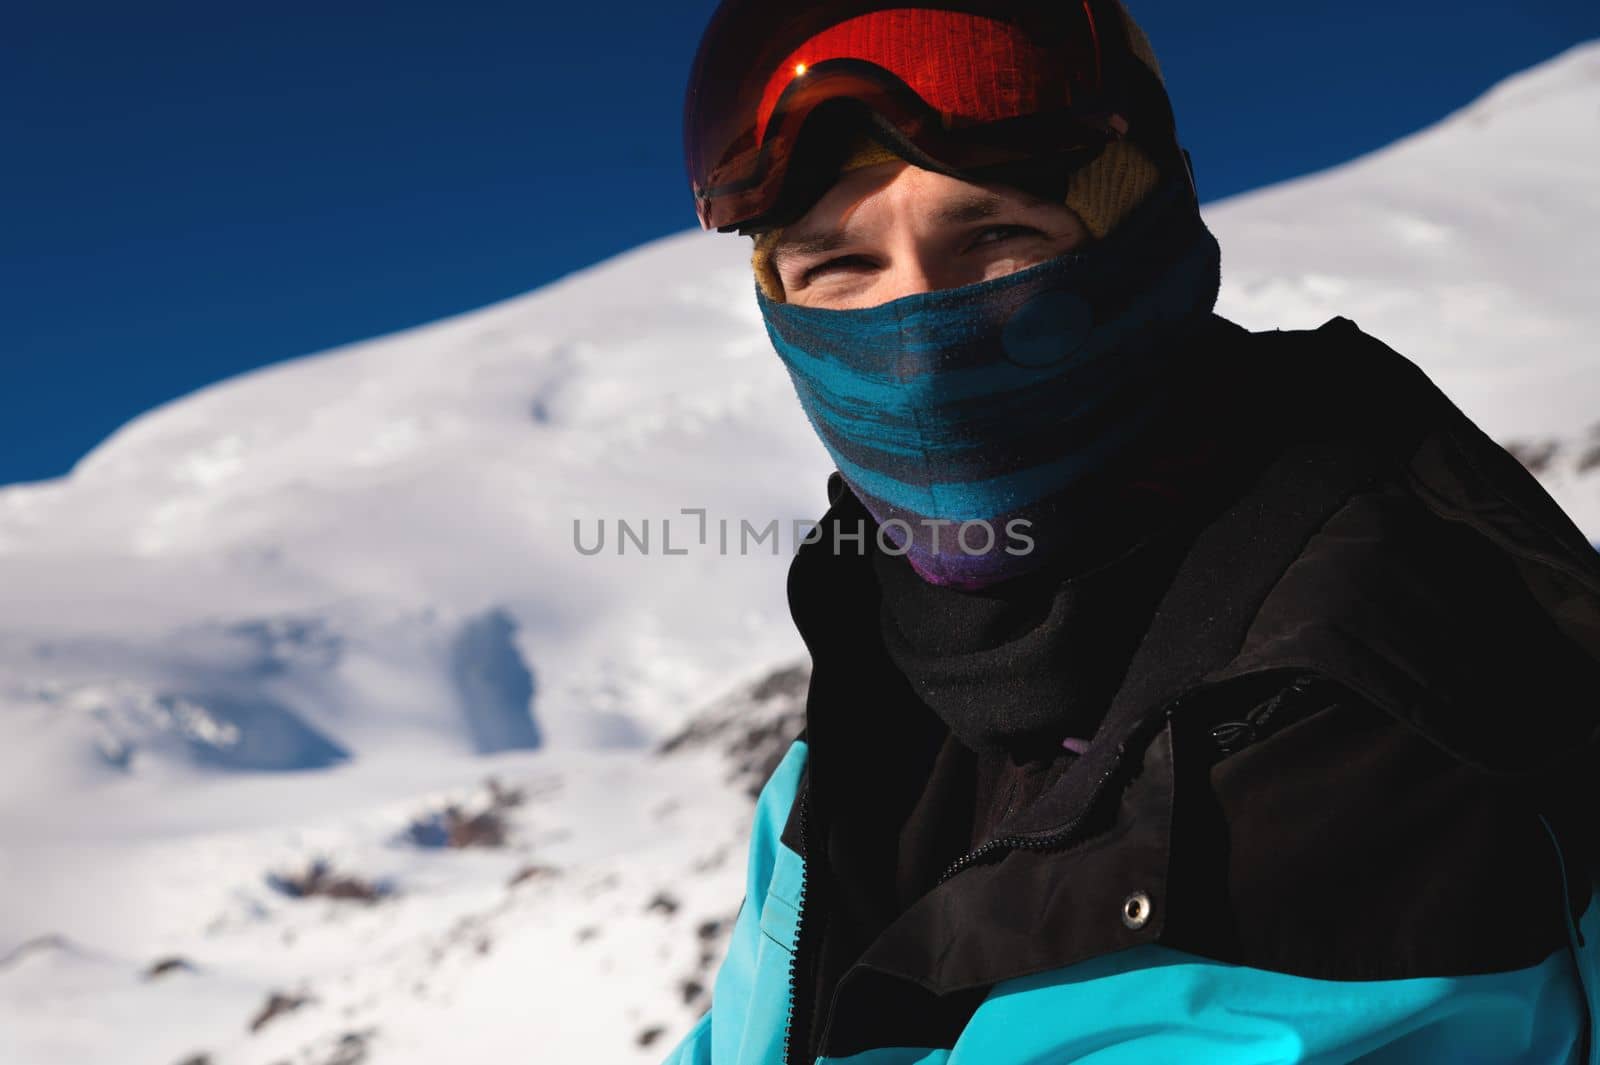 The skier looks at the camera before starting to ski. Man enjoys vacation in winter season. Portrait of a man in a balaclava and ski goggles against the backdrop of a snowy mountain.